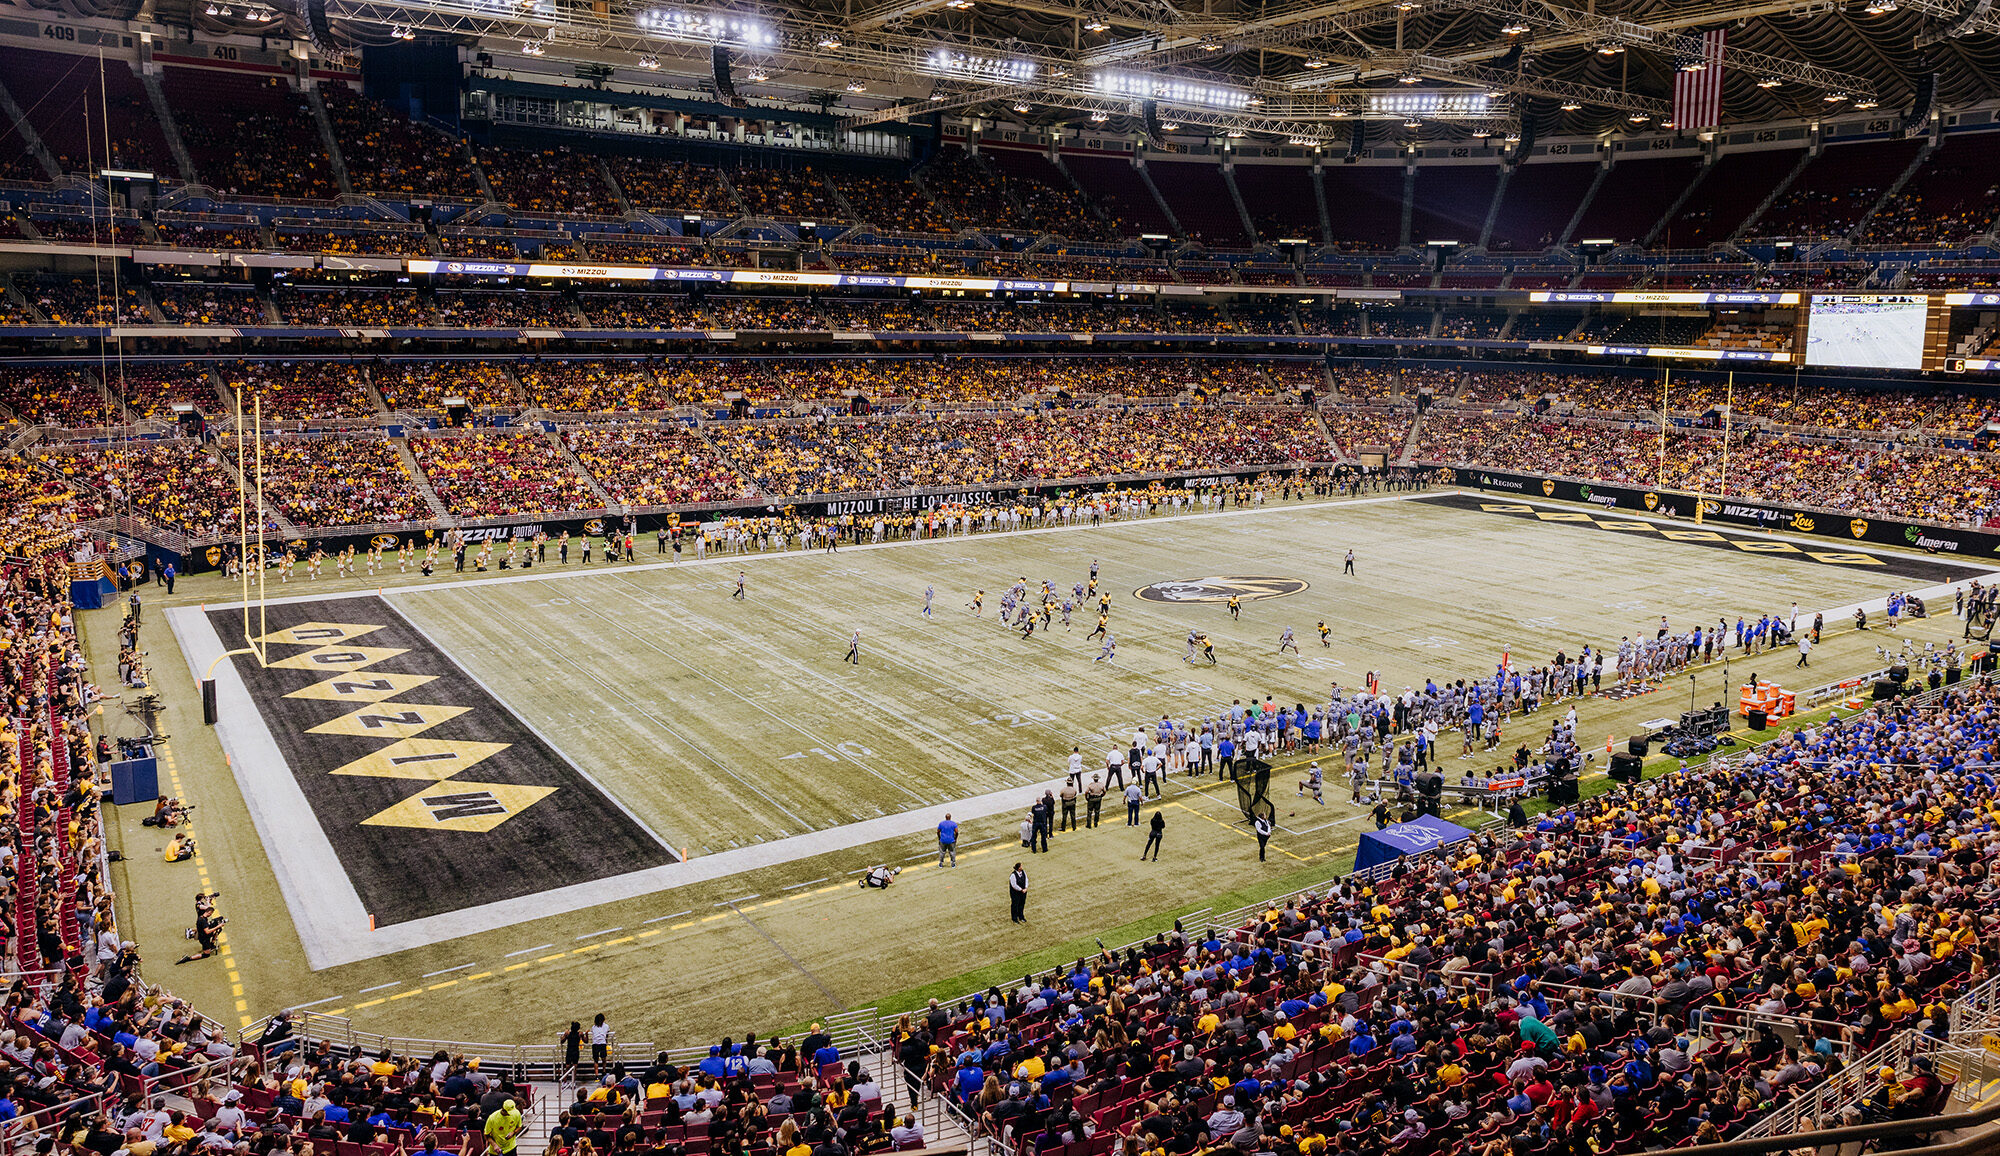 Mizzou Football Game Versus Memphis Set for 6:30 PM Kickoff on September 23 at Dome at America’s Center